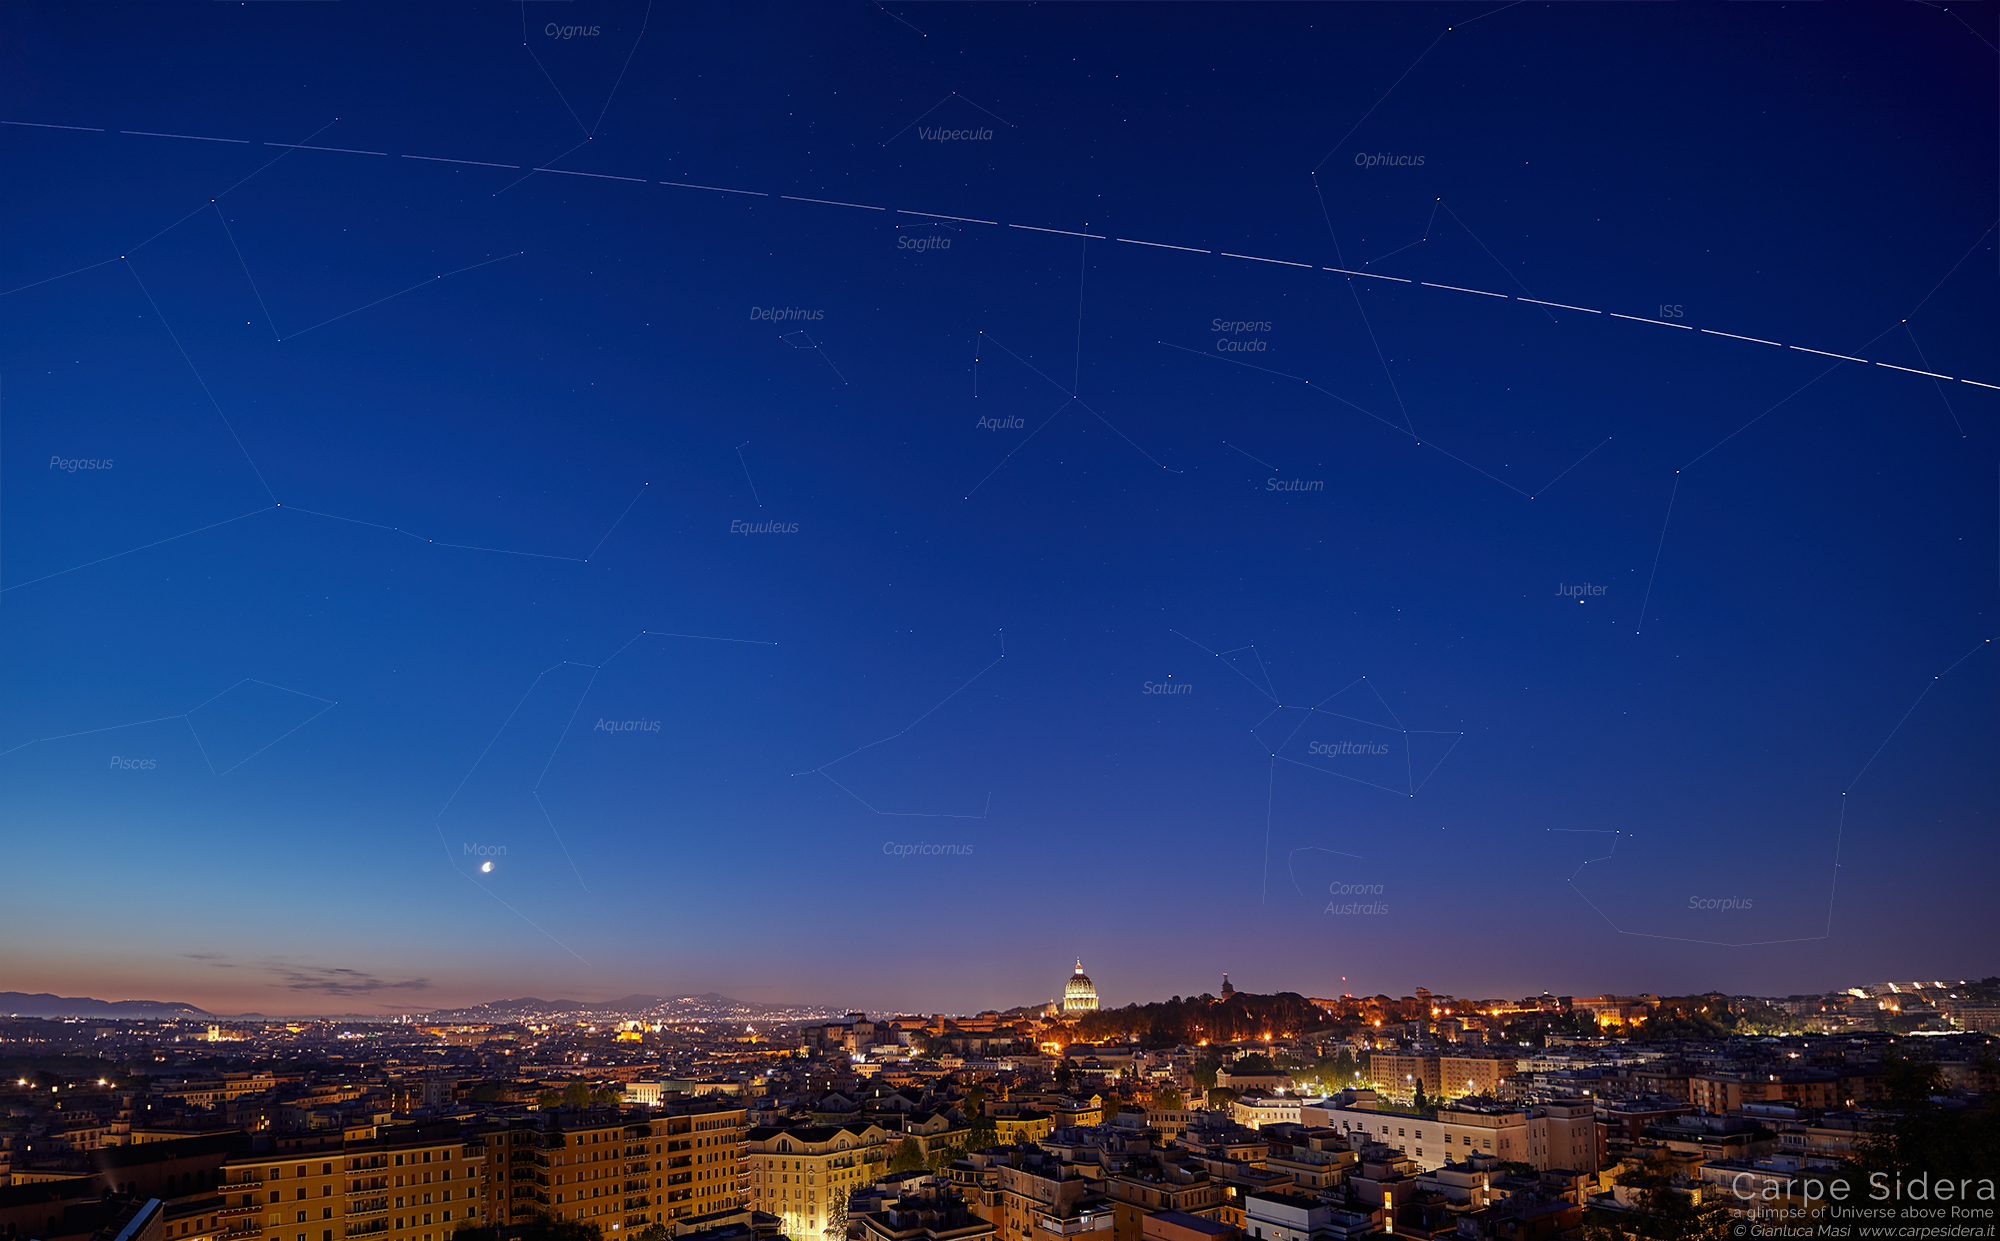 The International Space Station (ISS) crosses the sky above Rome at dawn. Constellations and planets are marked – 30 Apr. 2019